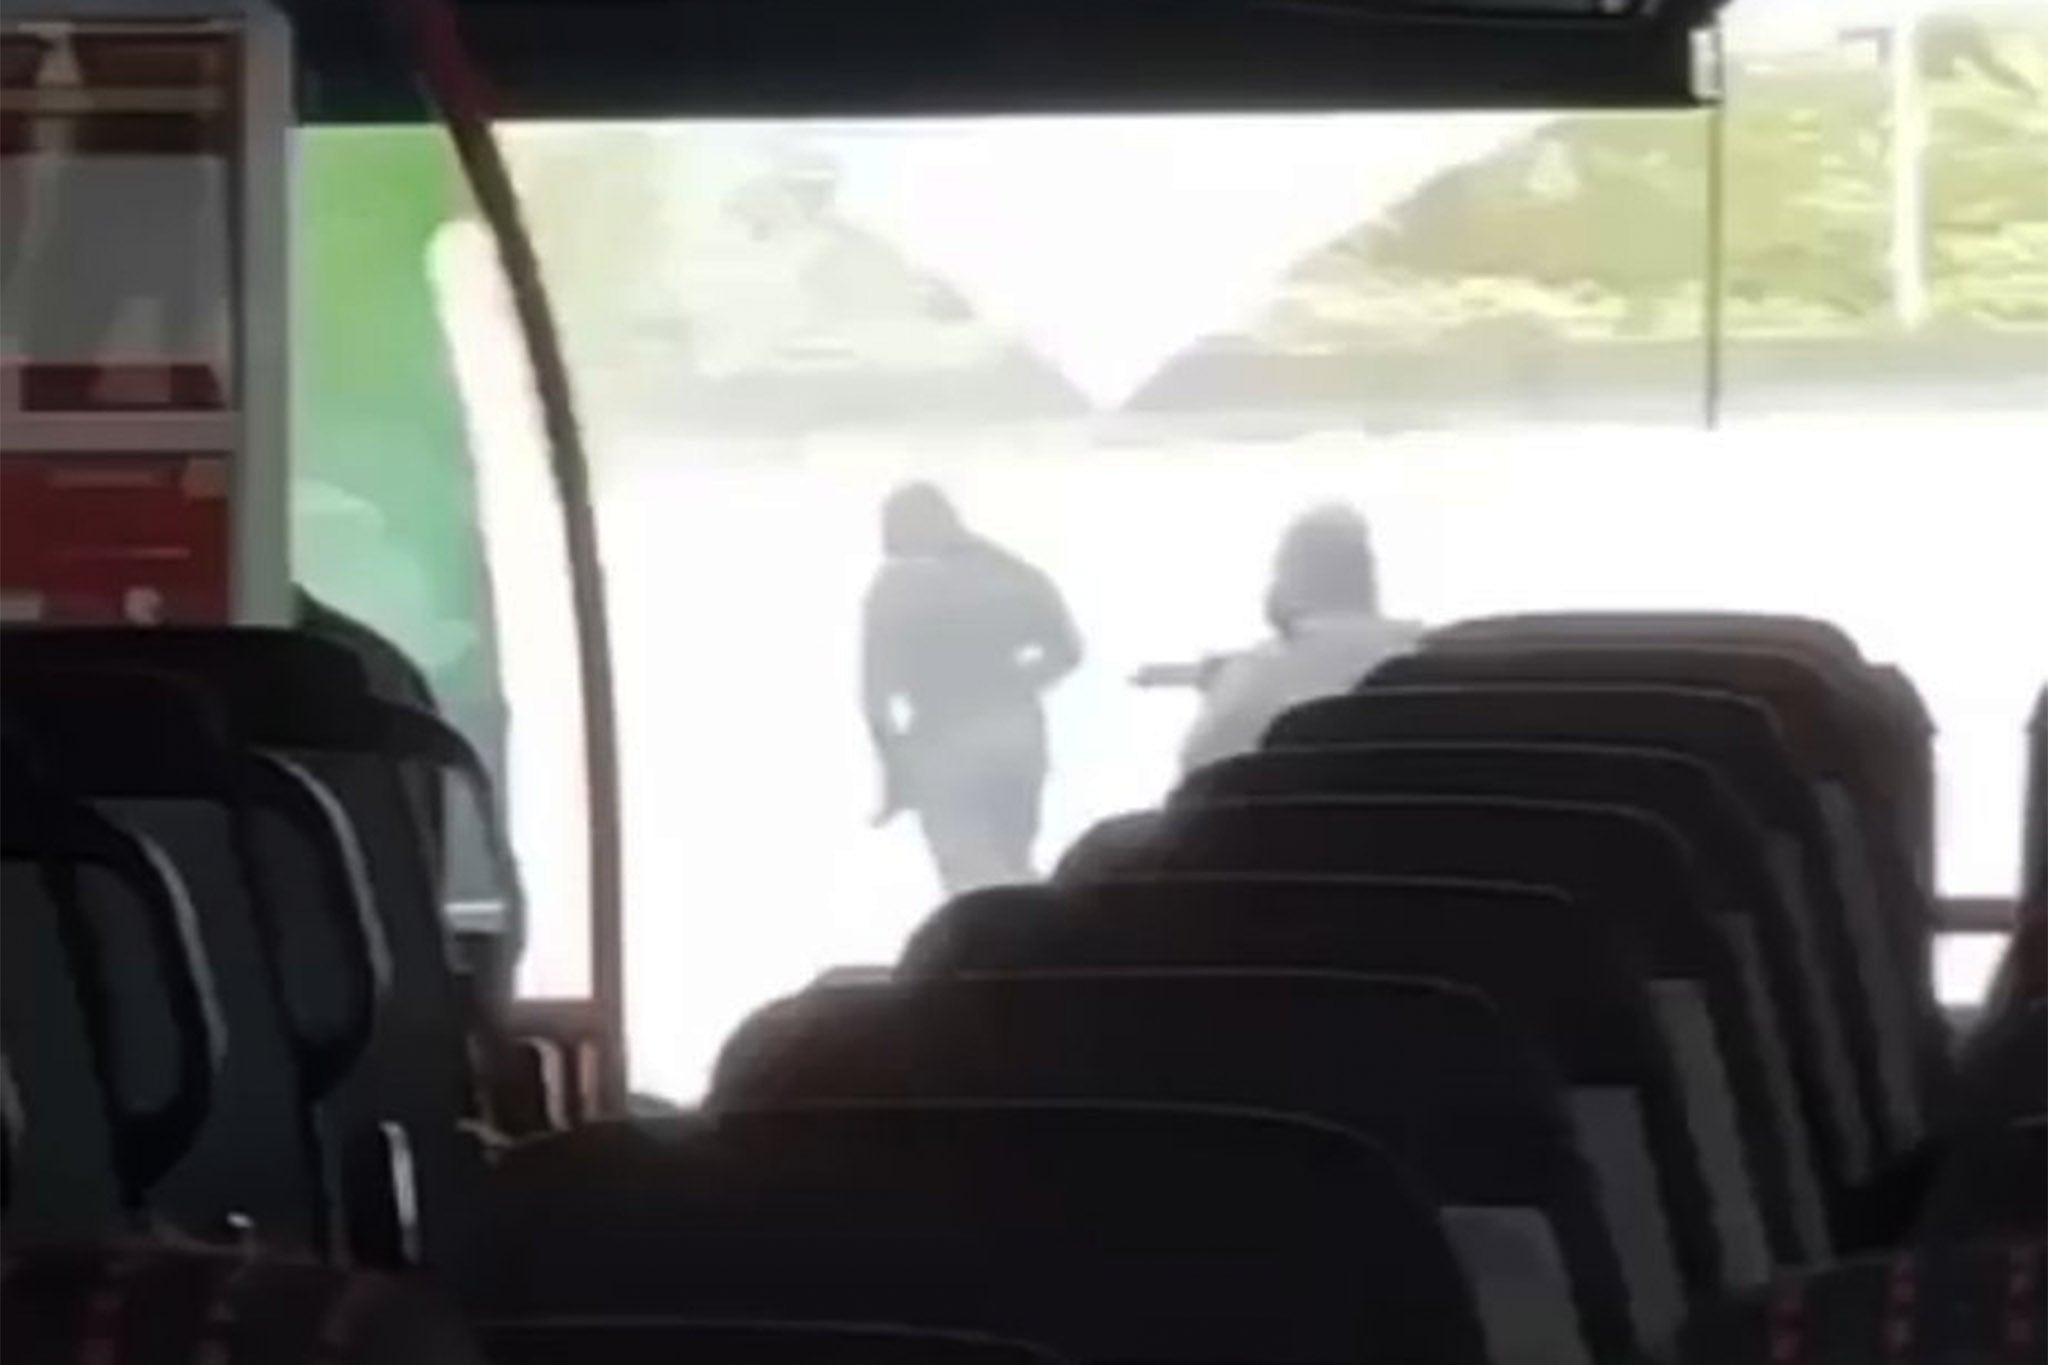 Gunmen spotted taking part in the deadly two-minute ambush from a coach